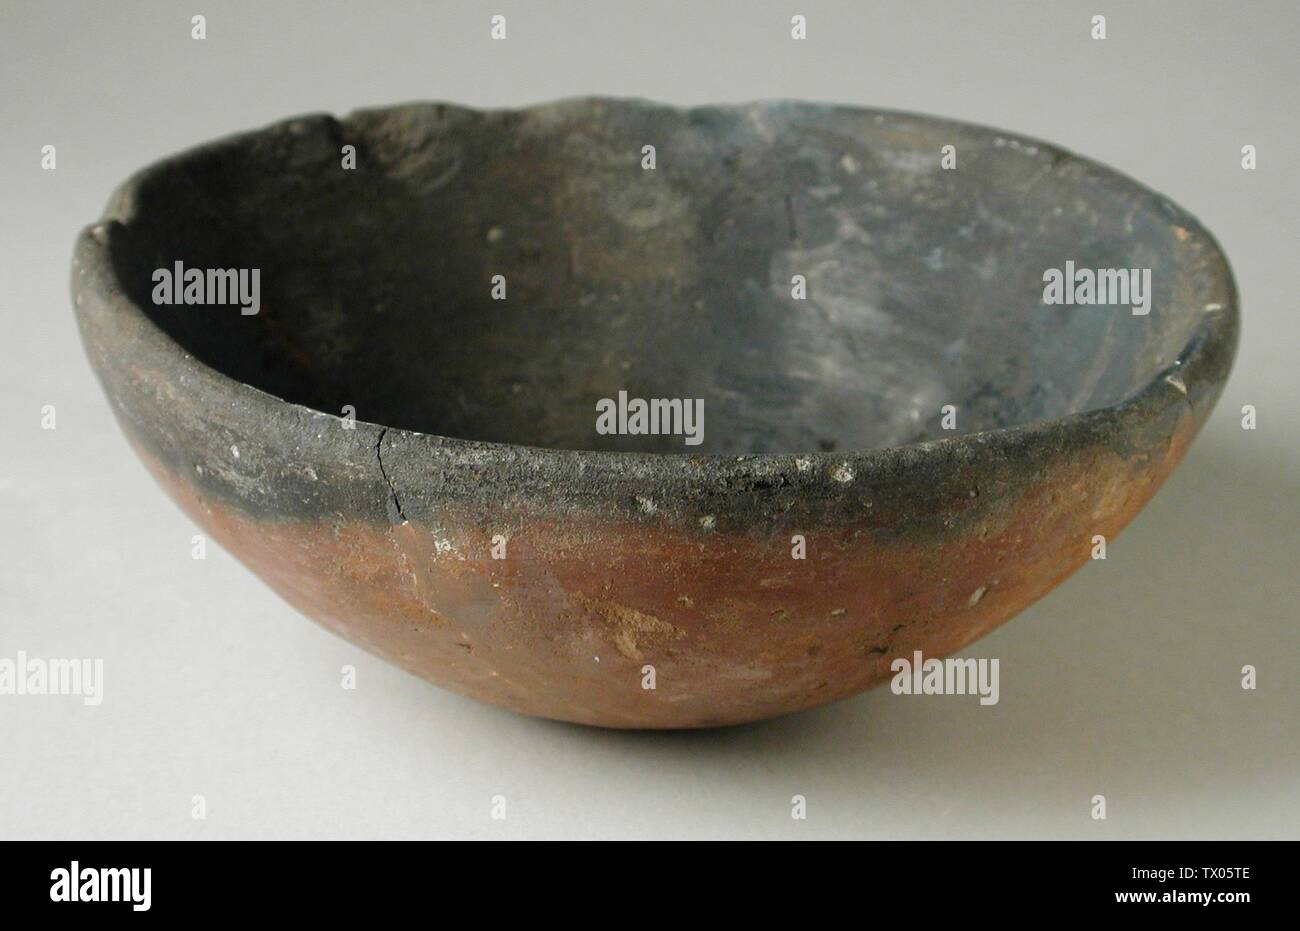 Black-topped Ware Bowl; Egypt, Predynastic Period (5500 - 3050 BCE)  Furnishings; Serviceware Terracotta Height:  1 15/16 in. (5 cm); Diameter:  4 1/2 in. (ll.4 cm) Gift of Jerome F. Snyder (M.80.202.40) Egyptian Art; Stock Photo